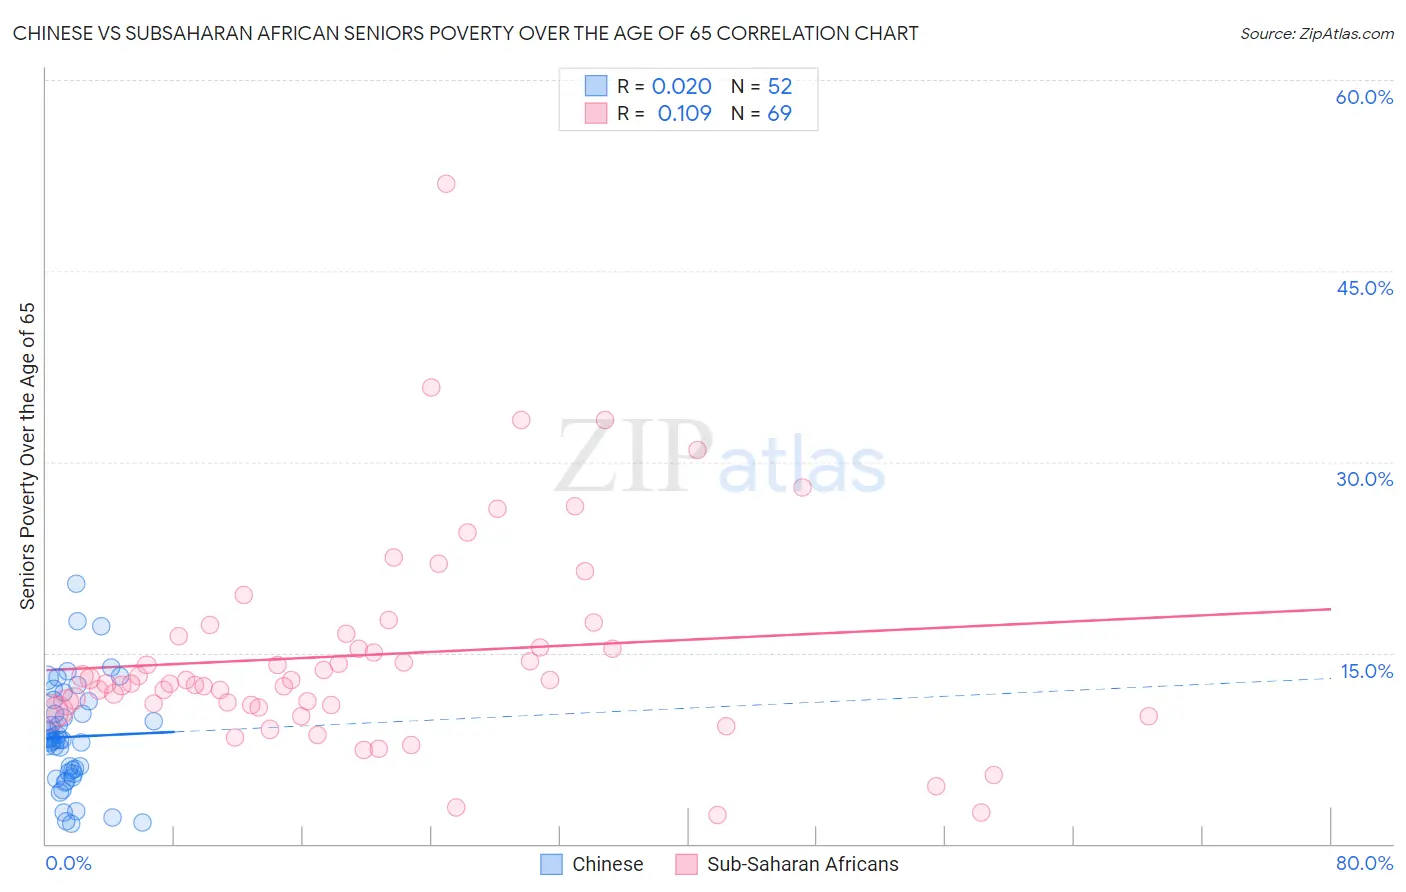 Chinese vs Subsaharan African Seniors Poverty Over the Age of 65